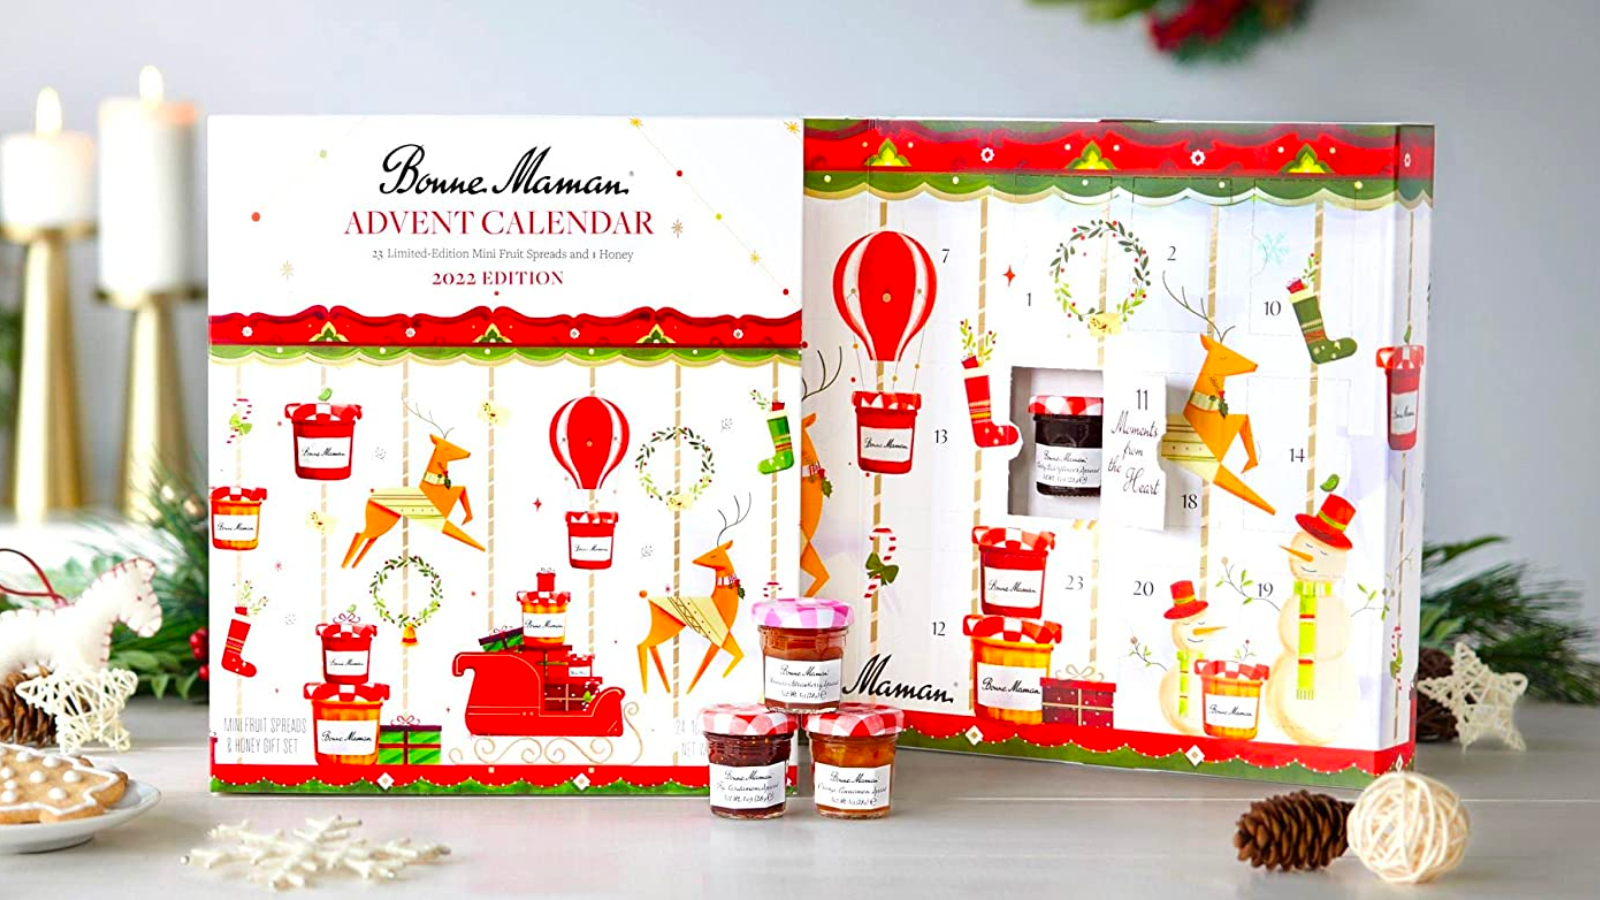 the Bonne Maman 2022 Limited Edition Advent Calendar propped up on a table amid holiday decorations